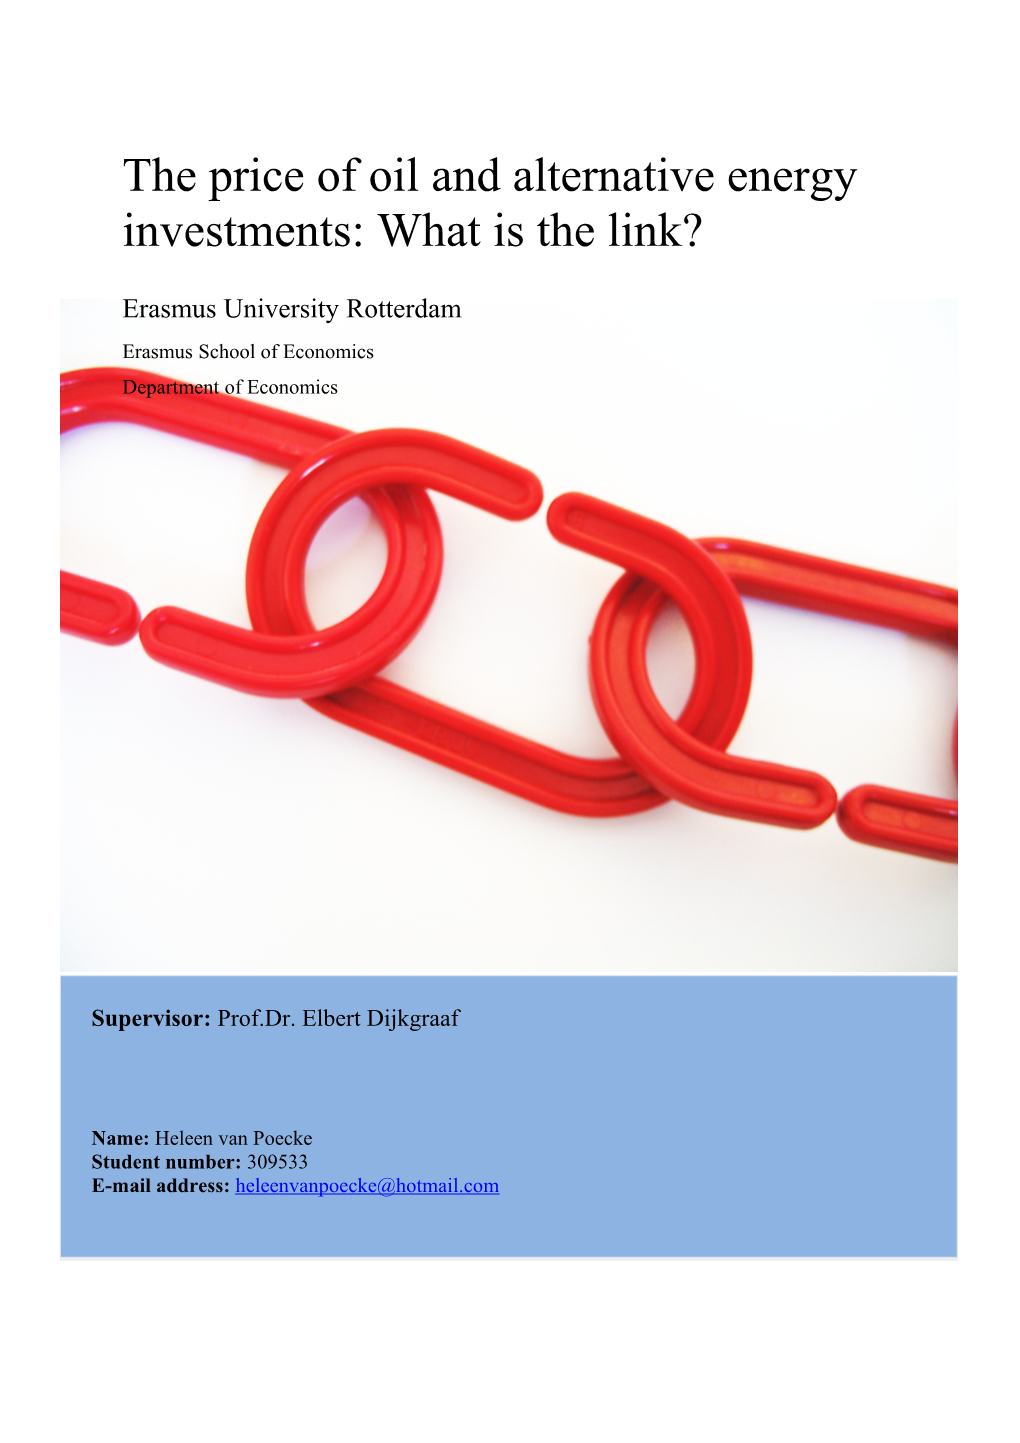 The Price of Oil and Alternative Energy Investments: What Is the Link?